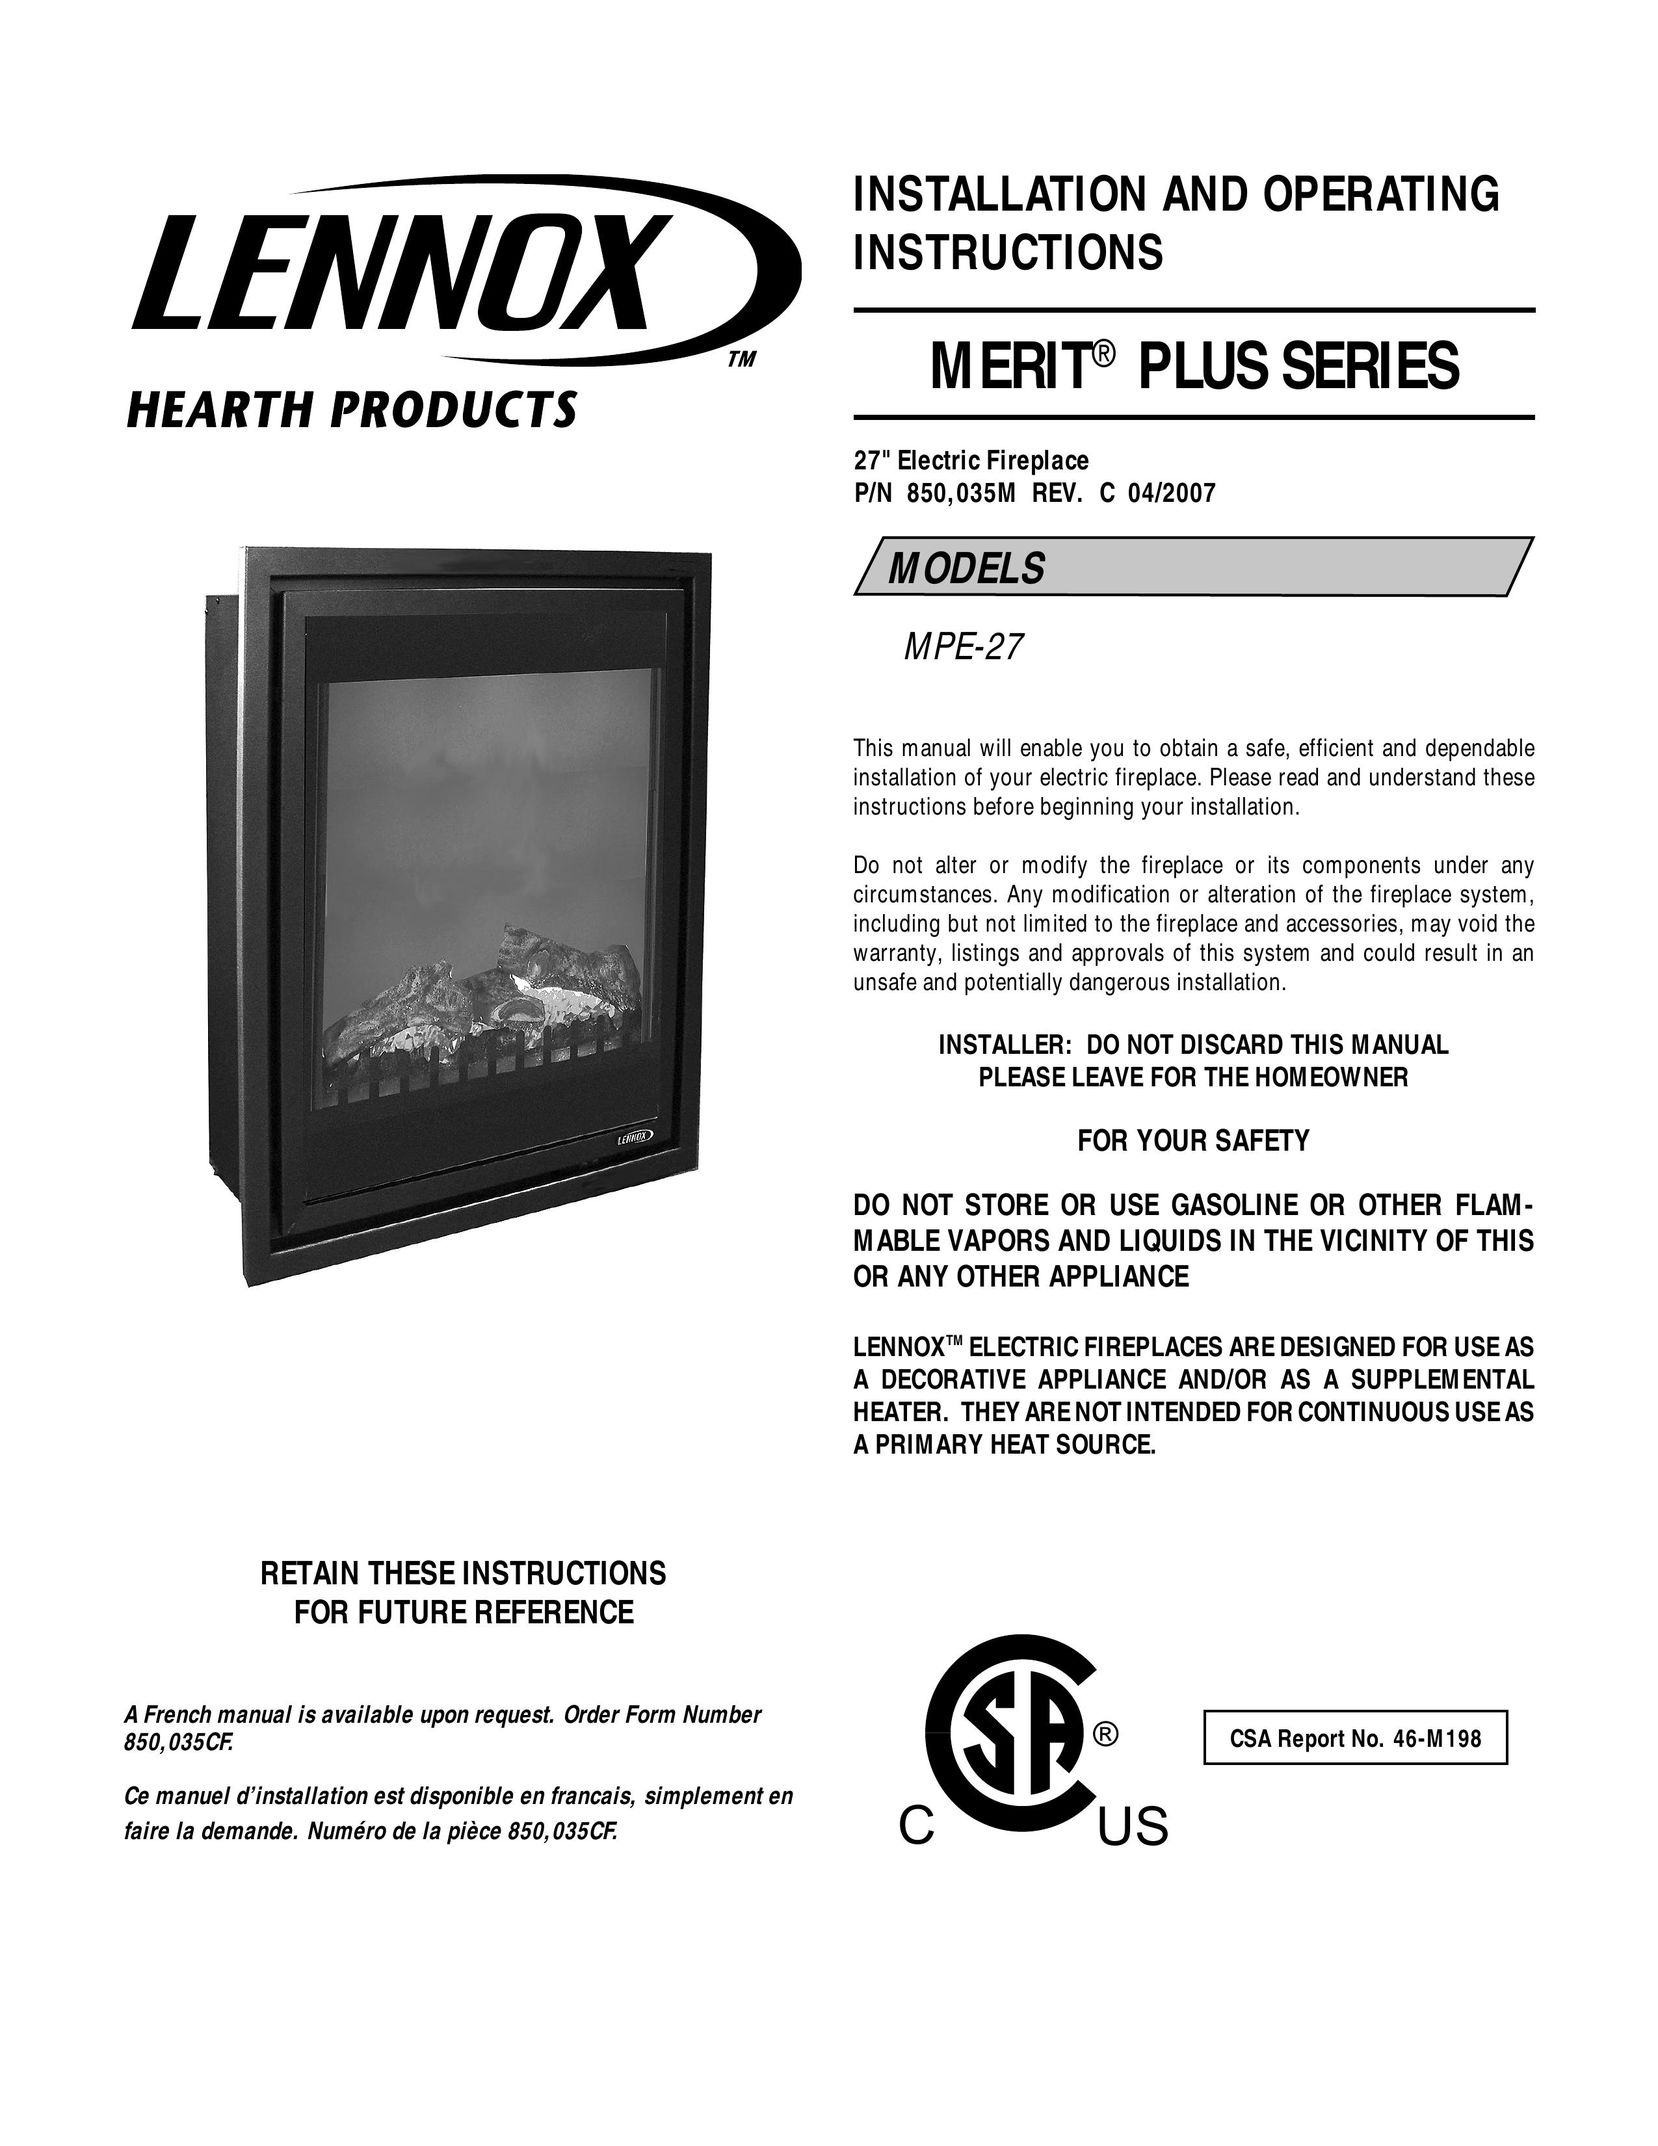 Lennox Hearth 27" Electric Fireplace Indoor Fireplace User Manual